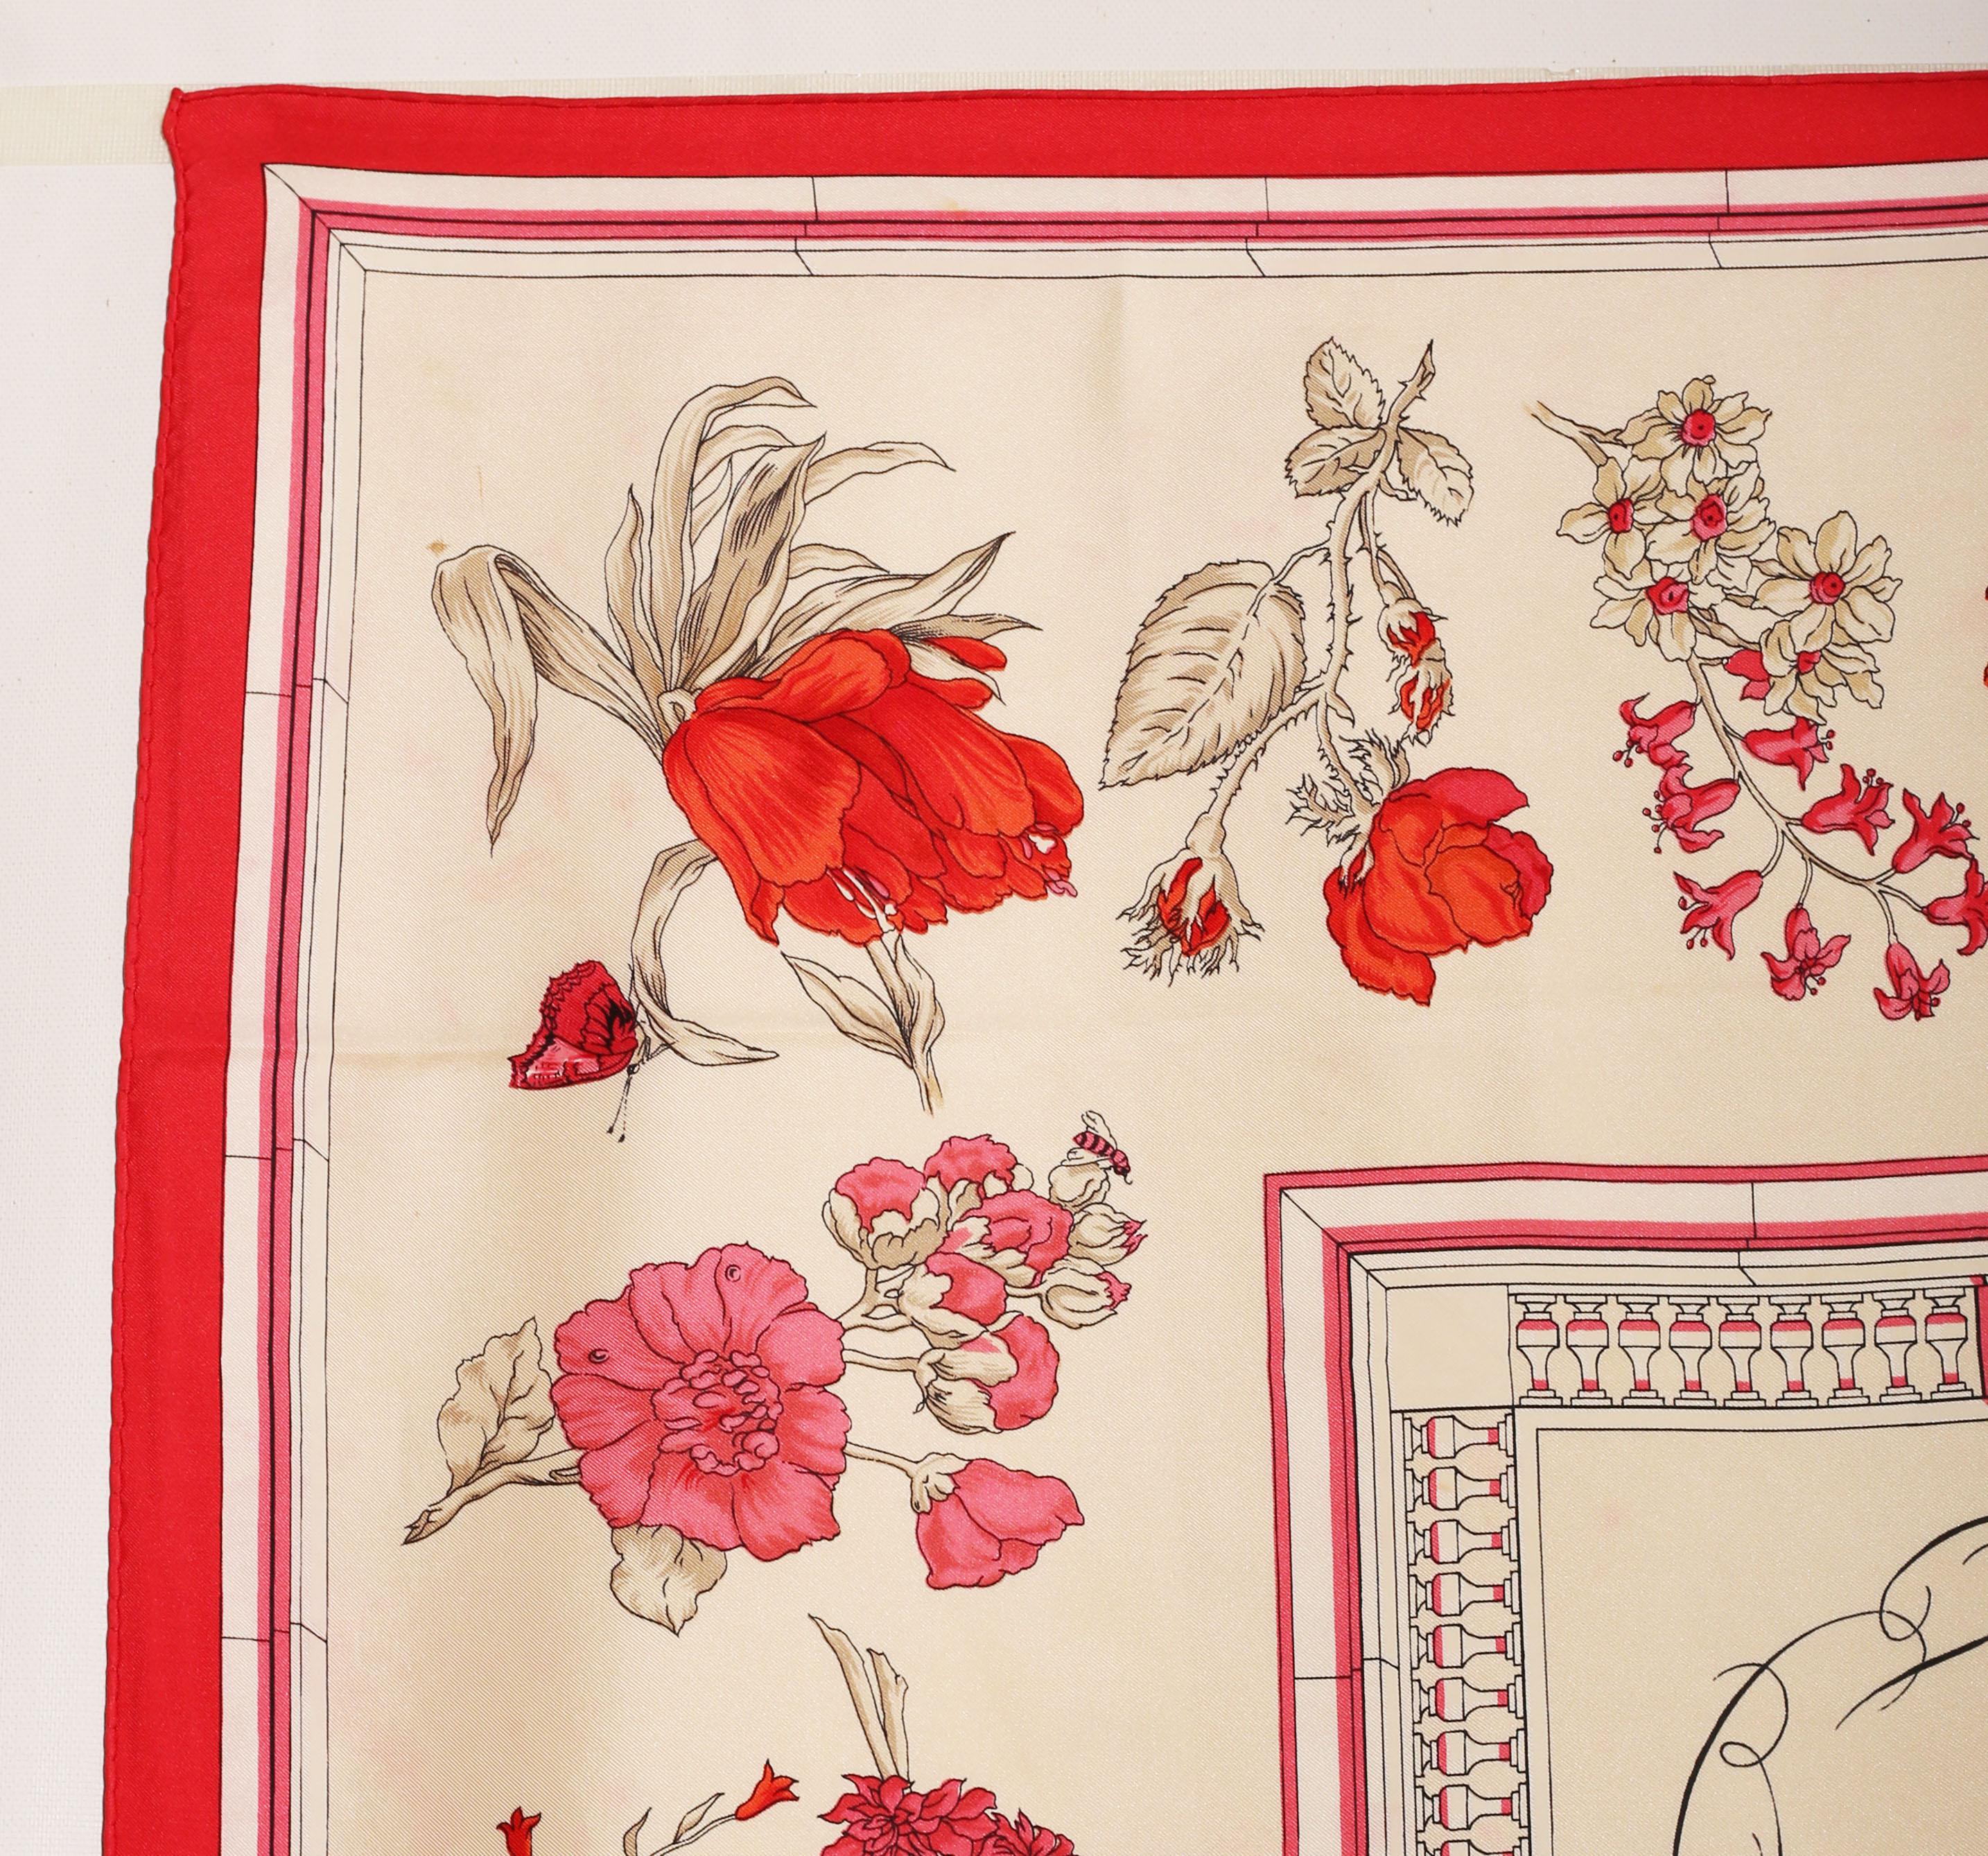 HERMES Scarf  Silk Scarf 100%  Paris, Made In France 
Quai eux Fleurs Hermès silk scarf Quai aux Fleurs was designed by Hugo Grygkar and first issued in 1952
The idea of ​​a carré, to print exclusive designs on a square piece of silk came about in